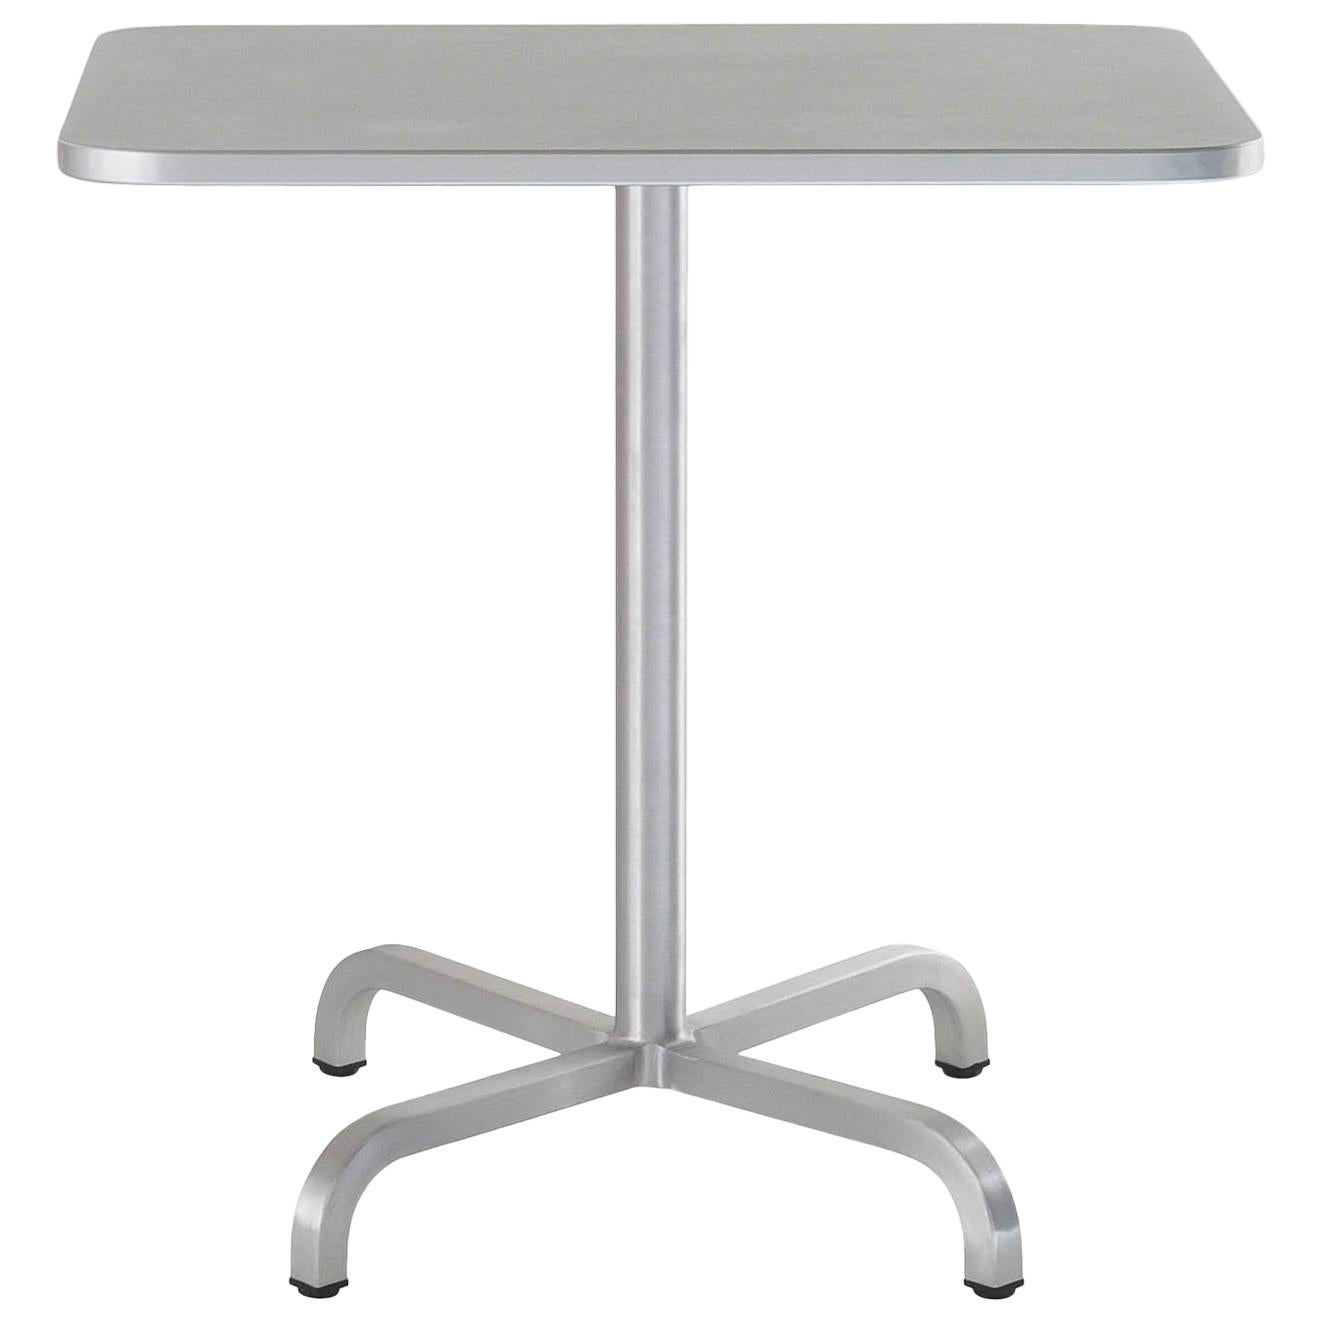 Emeco 20-06 Medium Square Café Table with Gray Laminate Top by Norman Foster